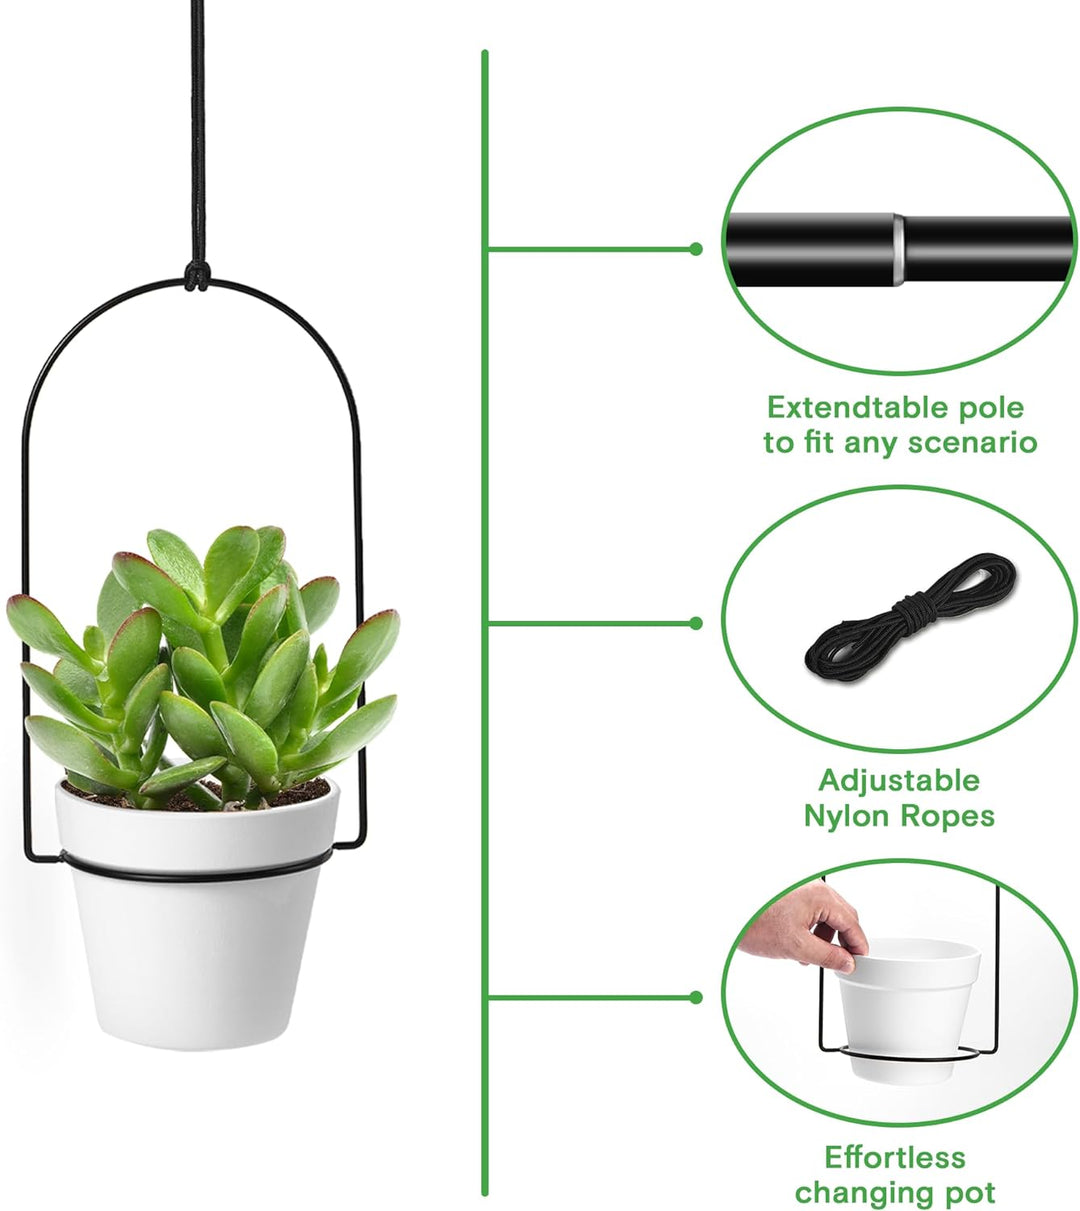 a plant in a pot with text: 'Extendtable pole to fit any scenario Adjustable Nylon Ropes Effortless changing pot'